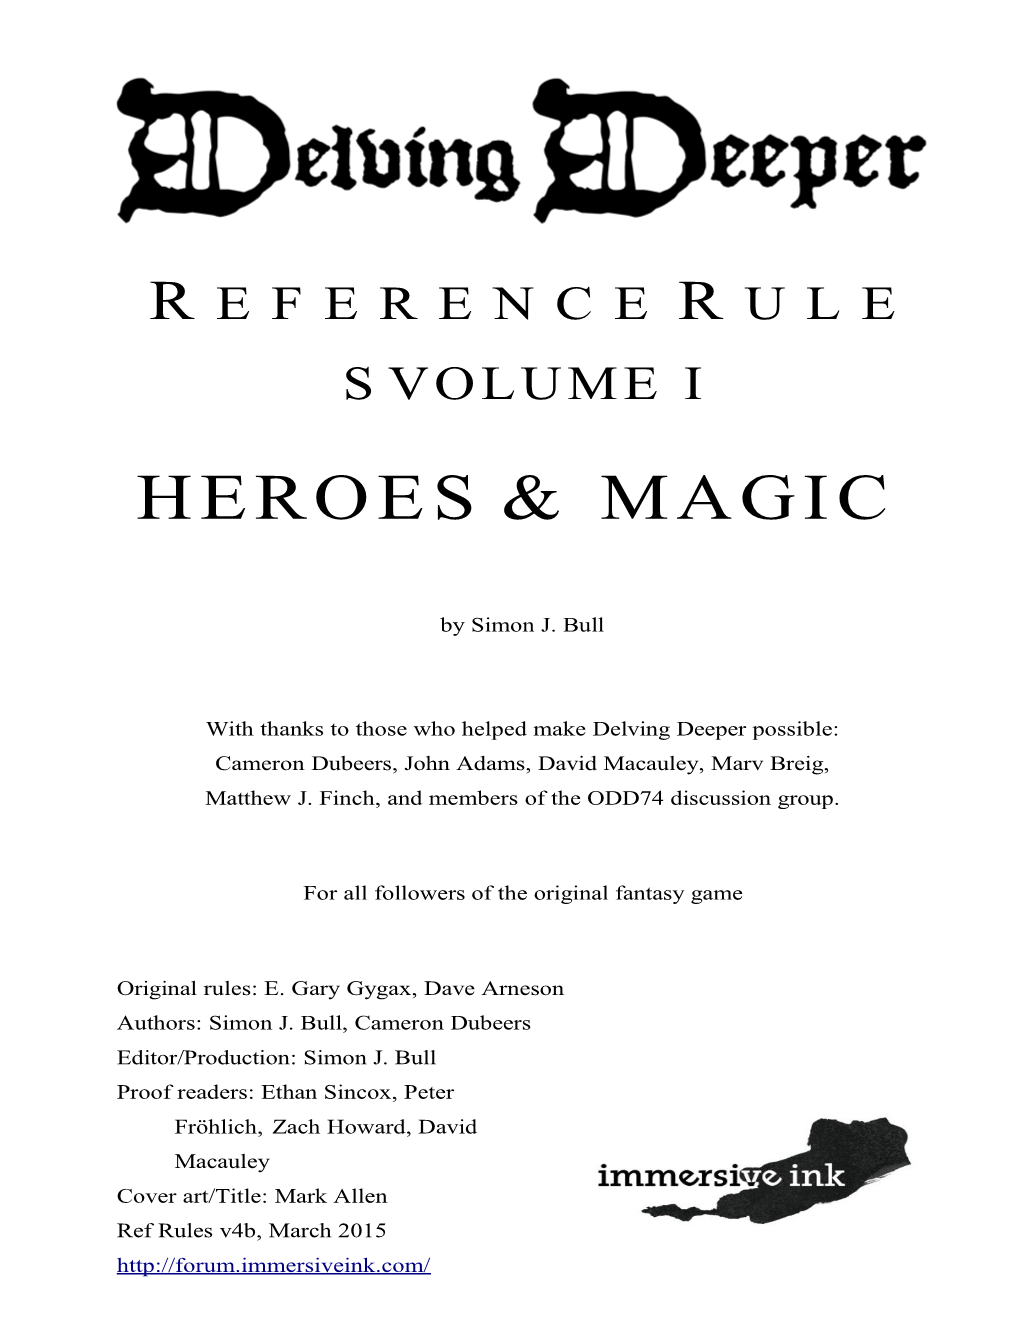 Delving Deeper Reference Rules Vol I V4b